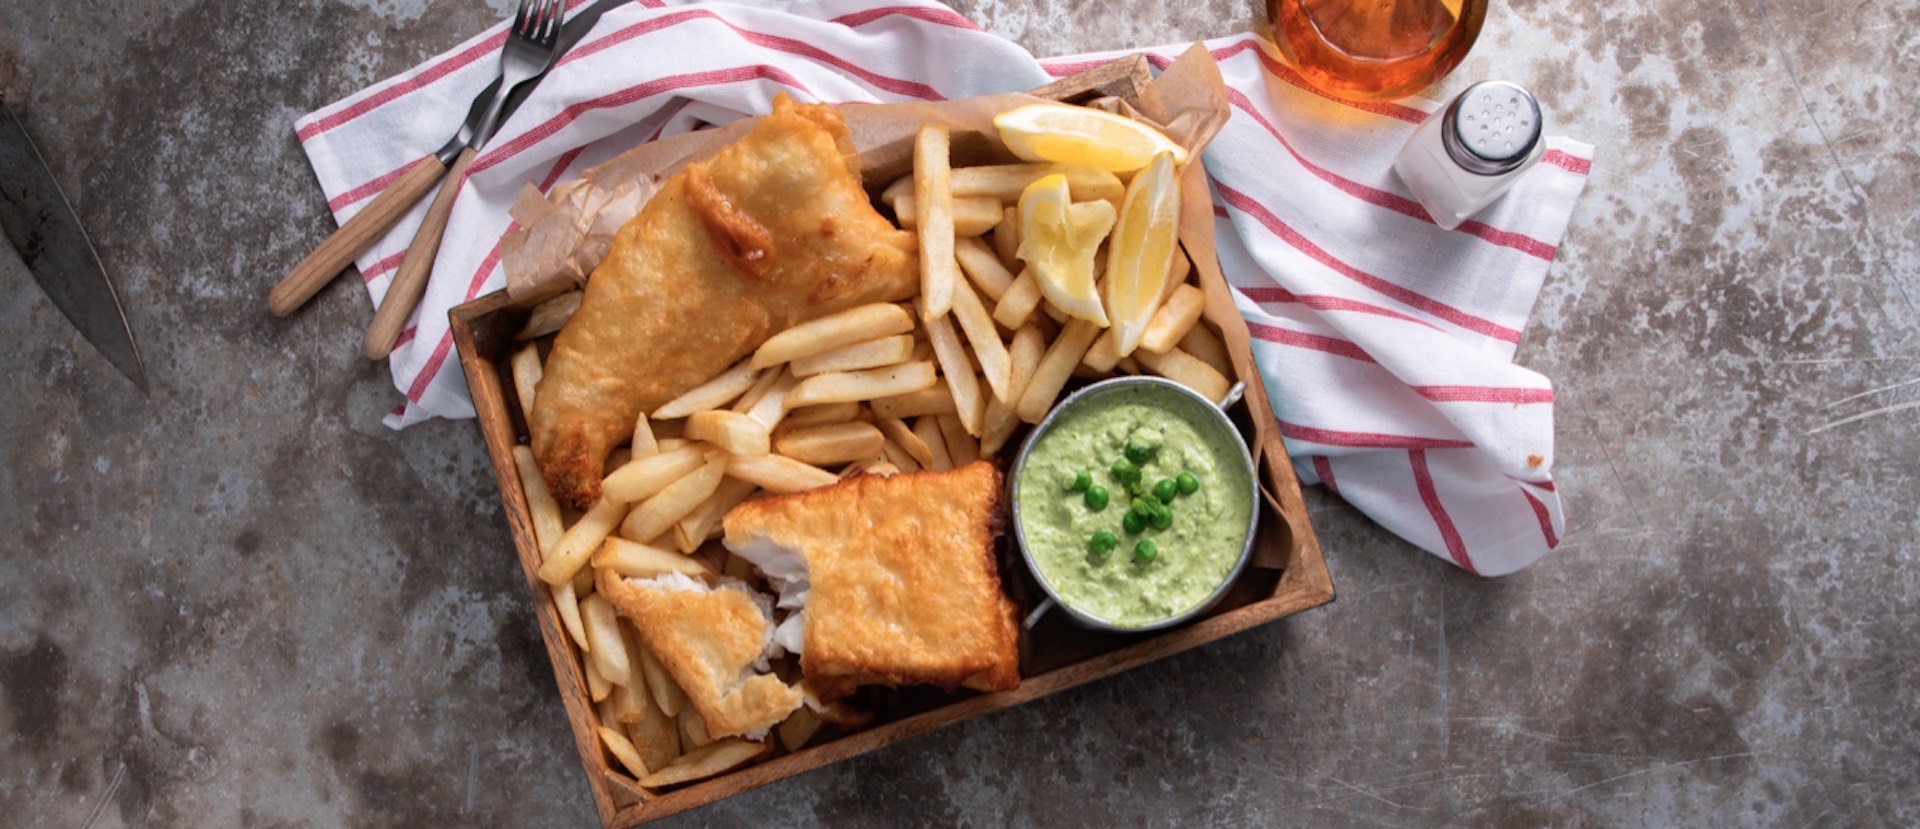 Fried Fish With Slap Chips